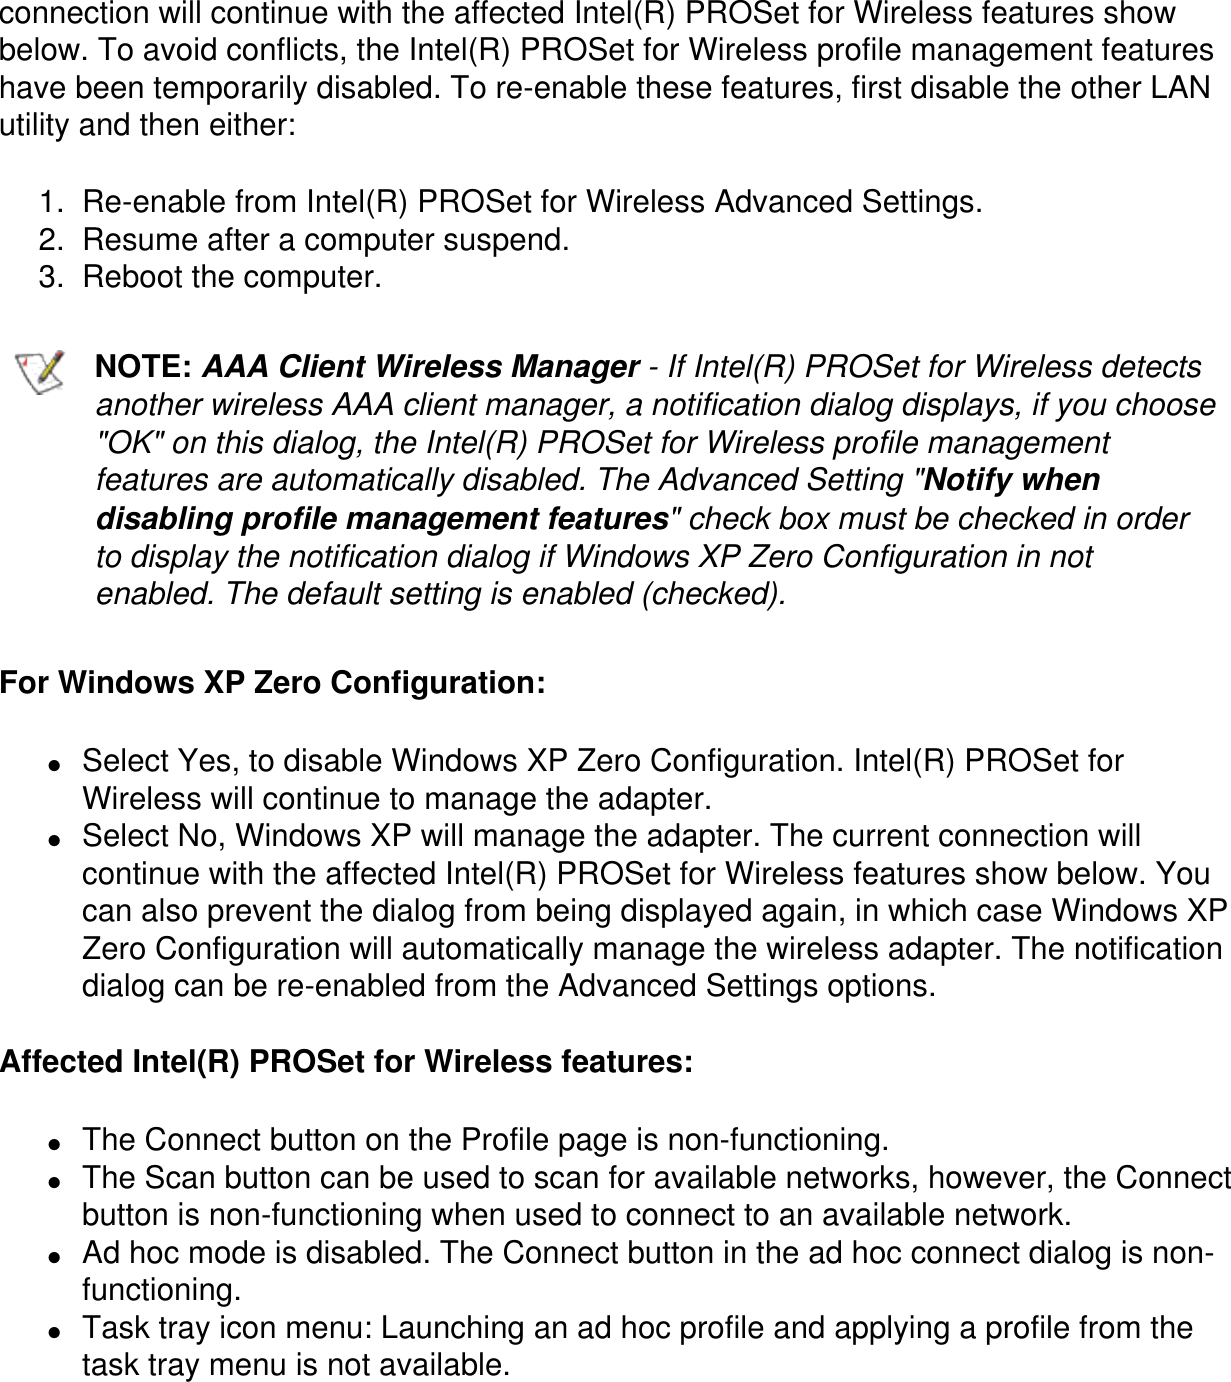 connection will continue with the affected Intel(R) PROSet for Wireless features show below. To avoid conflicts, the Intel(R) PROSet for Wireless profile management features have been temporarily disabled. To re-enable these features, first disable the other LAN utility and then either:1.  Re-enable from Intel(R) PROSet for Wireless Advanced Settings.2.  Resume after a computer suspend.3.  Reboot the computer.NOTE: AAA Client Wireless Manager - If Intel(R) PROSet for Wireless detects another wireless AAA client manager, a notification dialog displays, if you choose &quot;OK&quot; on this dialog, the Intel(R) PROSet for Wireless profile management features are automatically disabled. The Advanced Setting &quot;Notify when disabling profile management features&quot; check box must be checked in order to display the notification dialog if Windows XP Zero Configuration in not enabled. The default setting is enabled (checked).For Windows XP Zero Configuration:●     Select Yes, to disable Windows XP Zero Configuration. Intel(R) PROSet for Wireless will continue to manage the adapter.●     Select No, Windows XP will manage the adapter. The current connection will continue with the affected Intel(R) PROSet for Wireless features show below. You can also prevent the dialog from being displayed again, in which case Windows XP Zero Configuration will automatically manage the wireless adapter. The notification dialog can be re-enabled from the Advanced Settings options.Affected Intel(R) PROSet for Wireless features:●     The Connect button on the Profile page is non-functioning.●     The Scan button can be used to scan for available networks, however, the Connect button is non-functioning when used to connect to an available network.●     Ad hoc mode is disabled. The Connect button in the ad hoc connect dialog is non-functioning.●     Task tray icon menu: Launching an ad hoc profile and applying a profile from the task tray menu is not available.